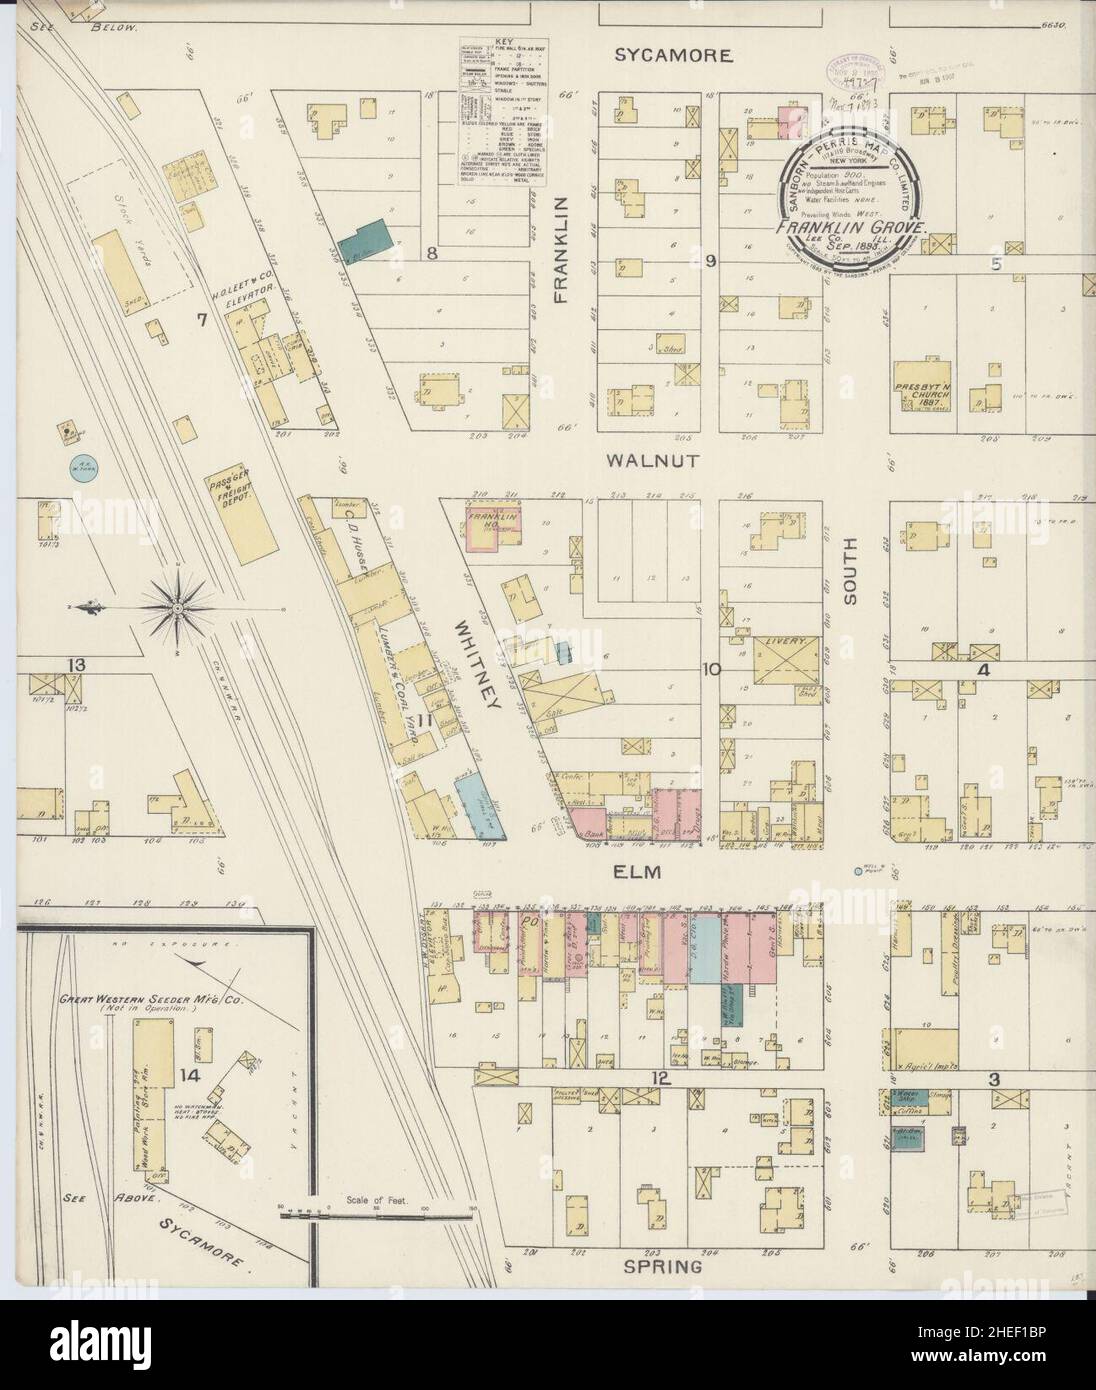 Sanborn Fire Insurance Map from Franklin Grove, Lee County, Illinois. Foto Stock